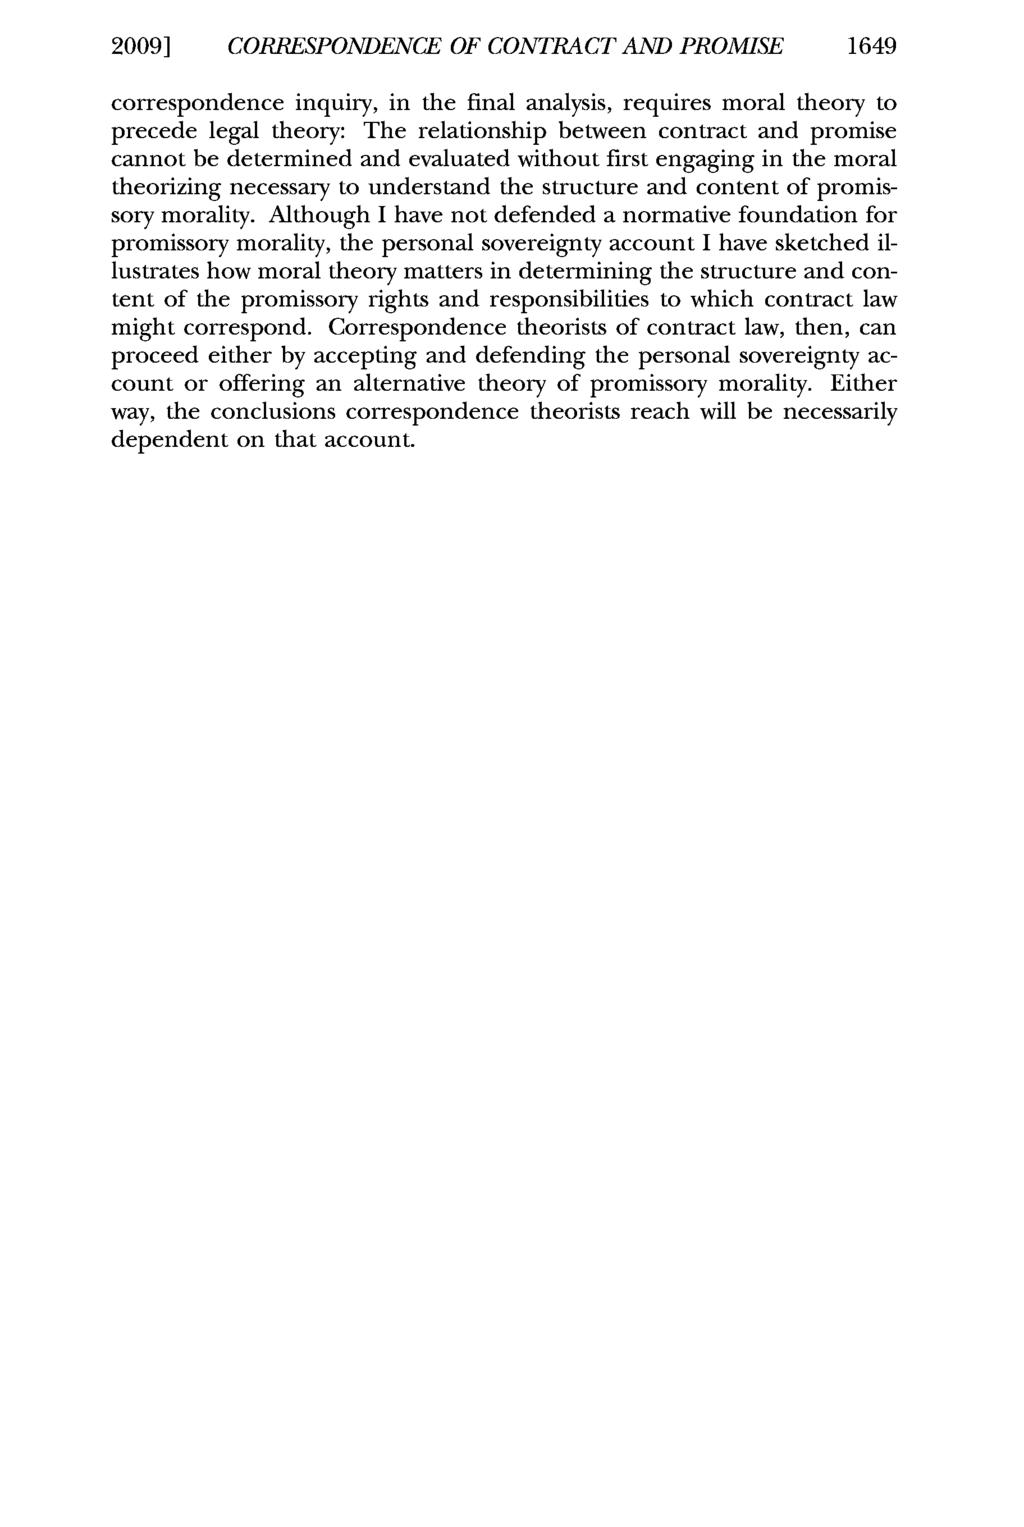 2009] CORRESPONDENCE OF CONTRACT AND PROMISE 1649 correspondence inquiry, in the final analysis, requires moral theory to precede legal theory: The relationship between contract and promise cannot be